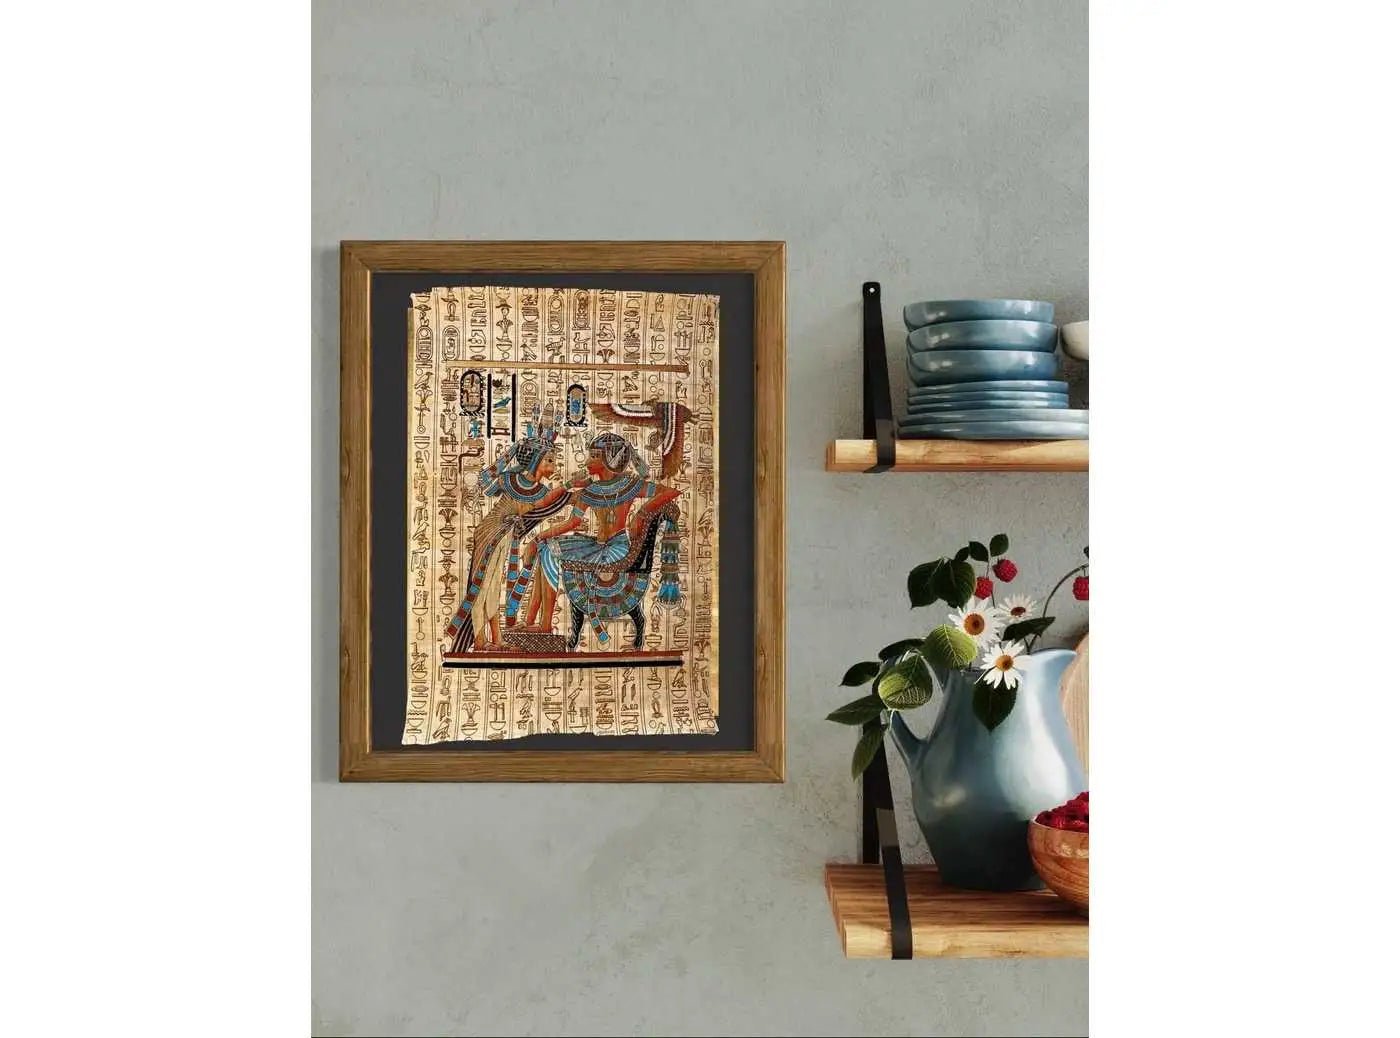 Queen Ankhesenamun Anointing her Husband King Tut - Papyrus Painting from Ancient Egypt - Hieroglyphic Background - 13x17 inches - 30x40 cm